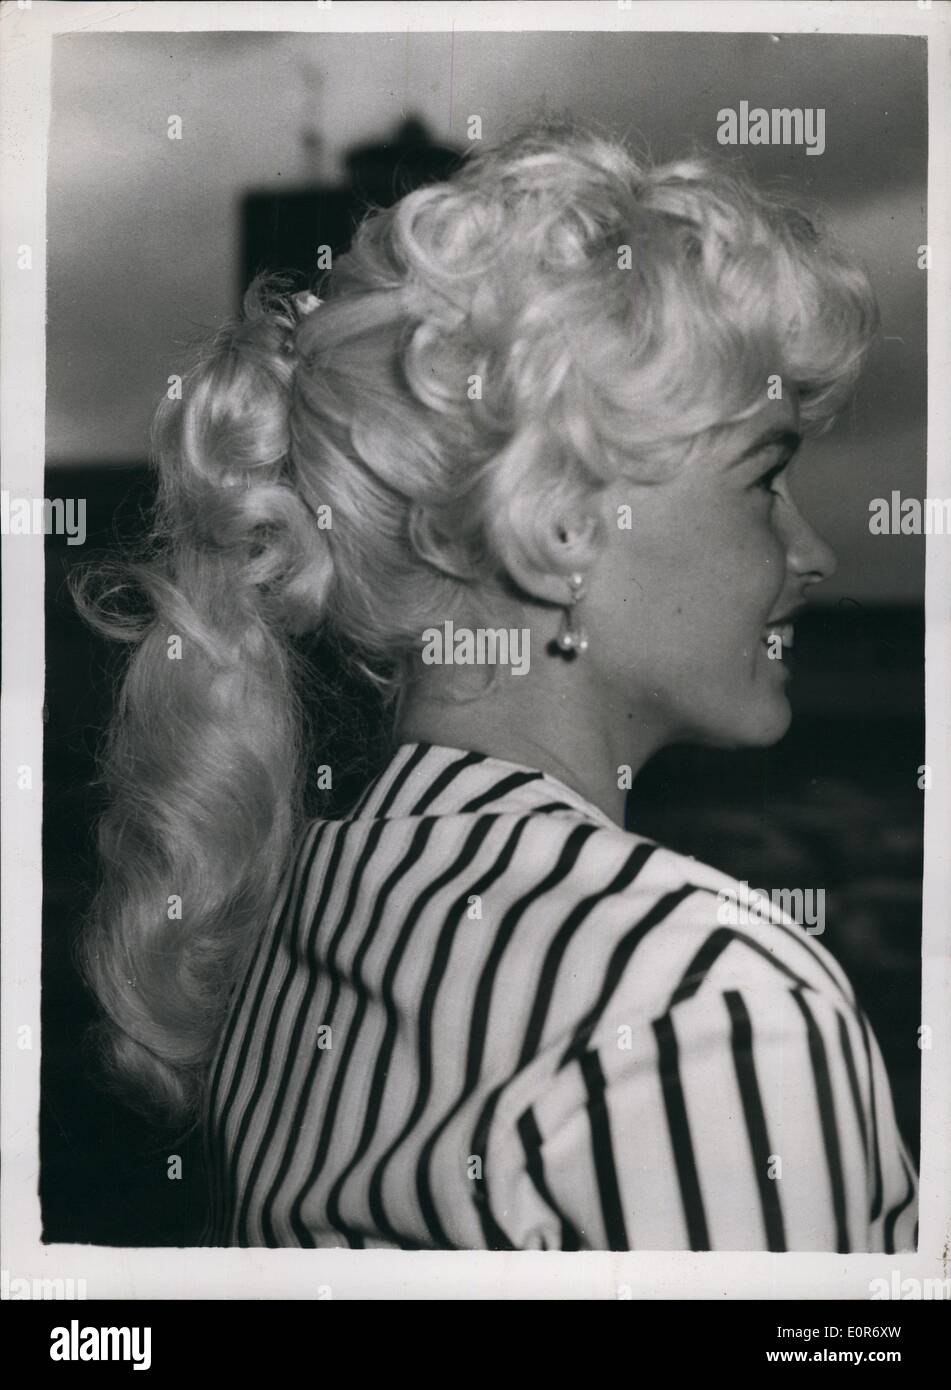 May 05, 1958 - Jayne Mansfield And Husband Fly To Cannes Film Festival: Leaving London by air today was American film star Jayne Mansfield who is flying to Cannes to attend the film festival. She was accompanied by her husband Micky Hargitay. Photo shows Jayne Mansfield - with her ''Horsey'' hair style - as she left London airport this morning. Stock Photo